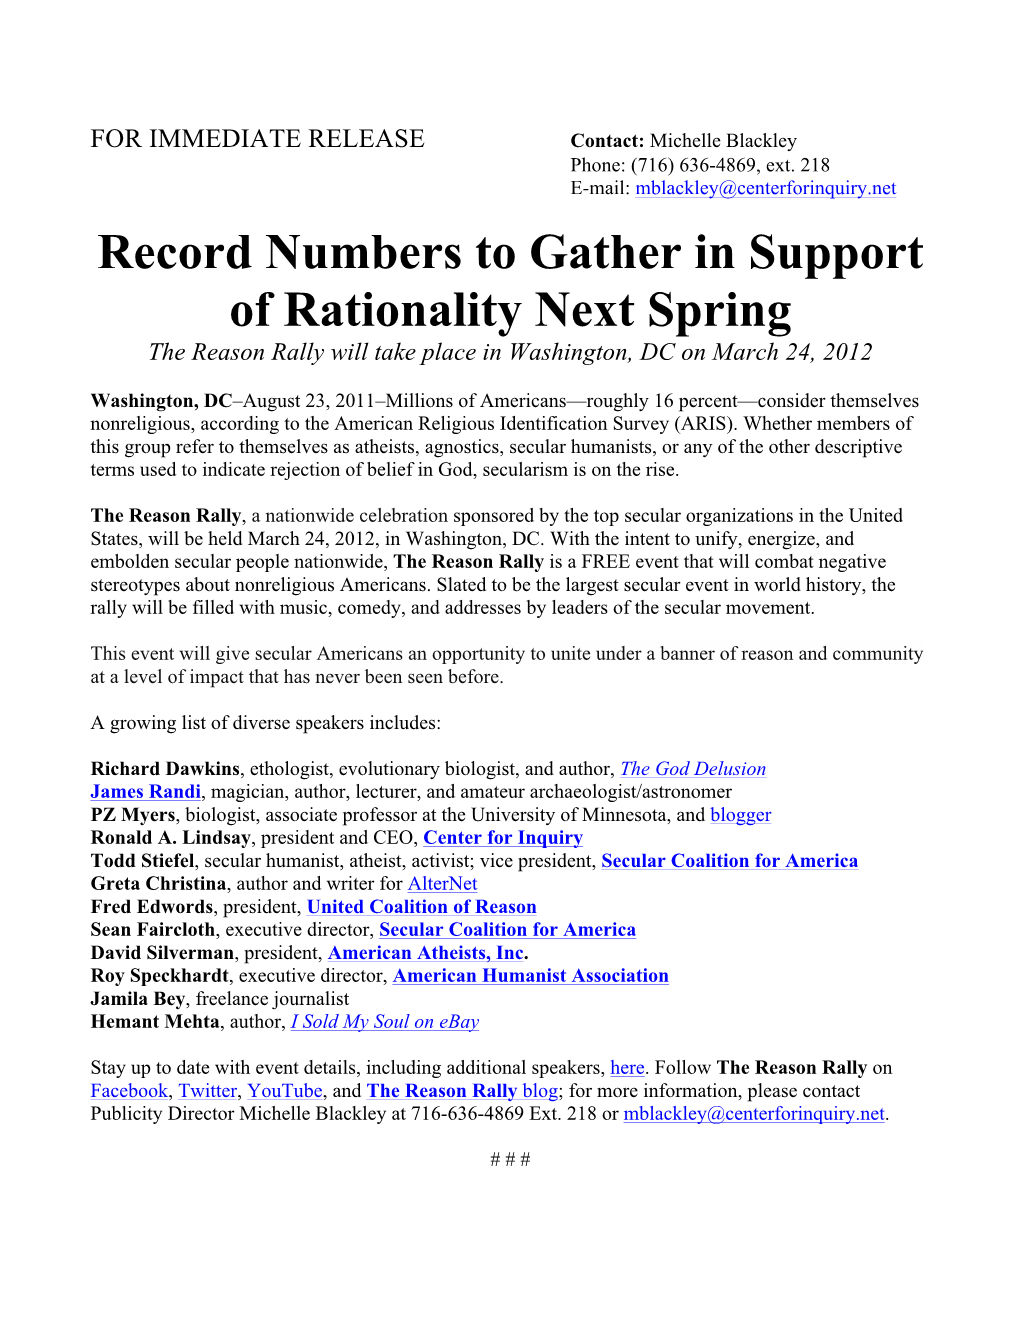 Record Numbers to Gather in Support of Rationality Next Spring the Reason Rally Will Take Place in Washington, DC on March 24, 2012